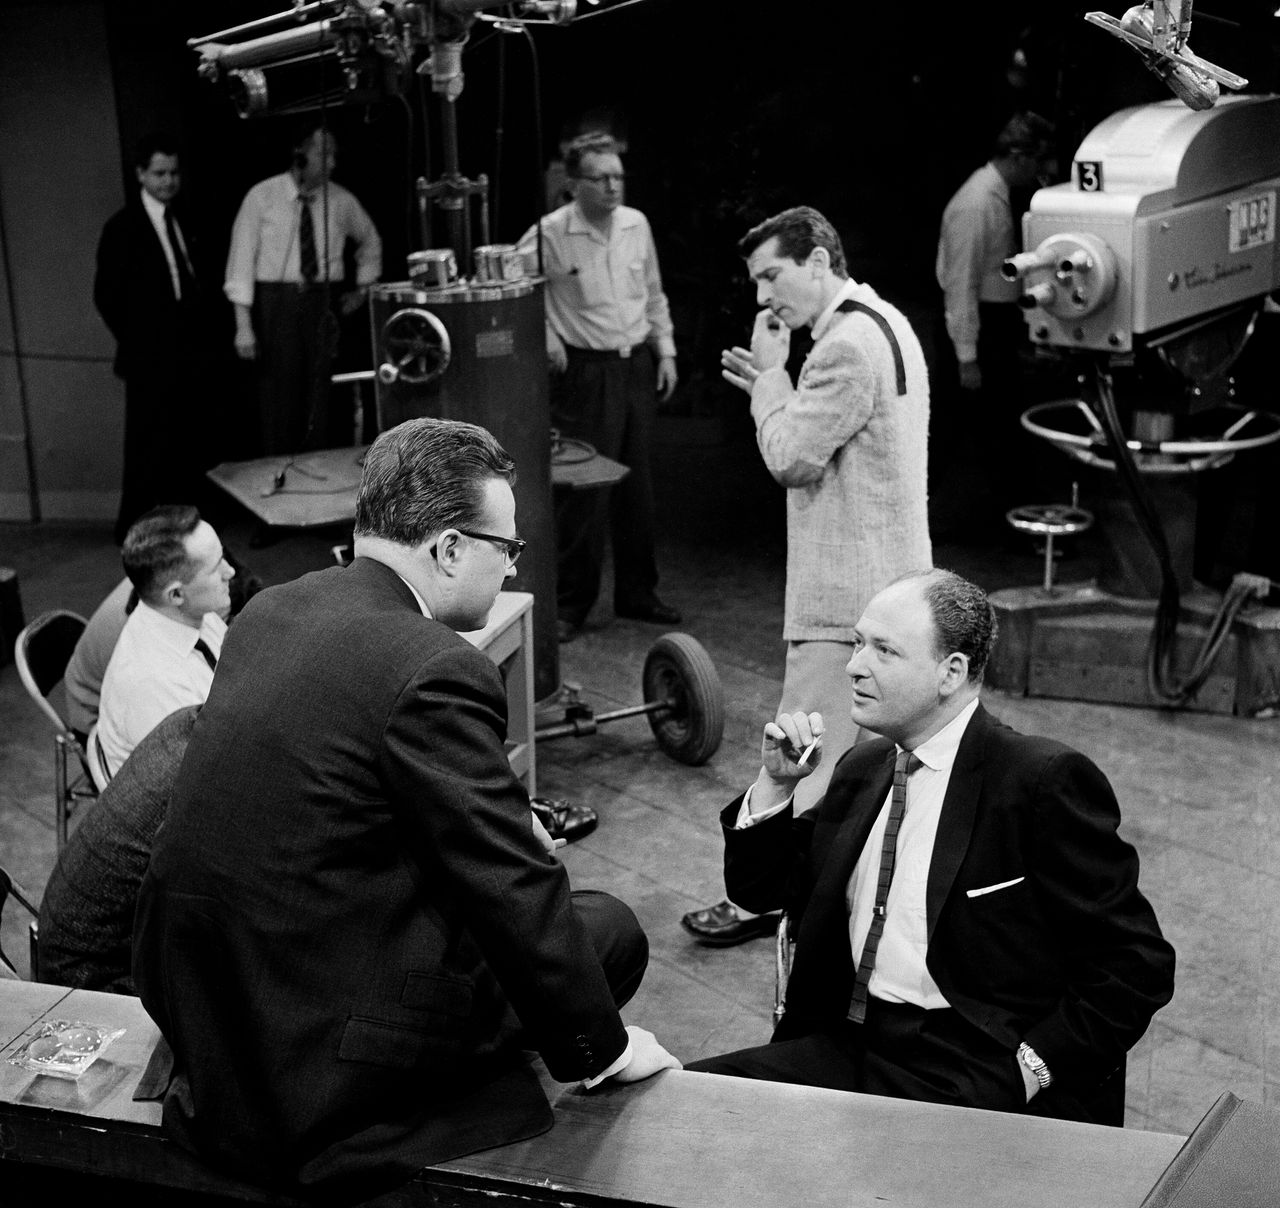 Writers on the set of "The NBC Comedy Hour," including Lear (far right) on Jan. 19, 1956.